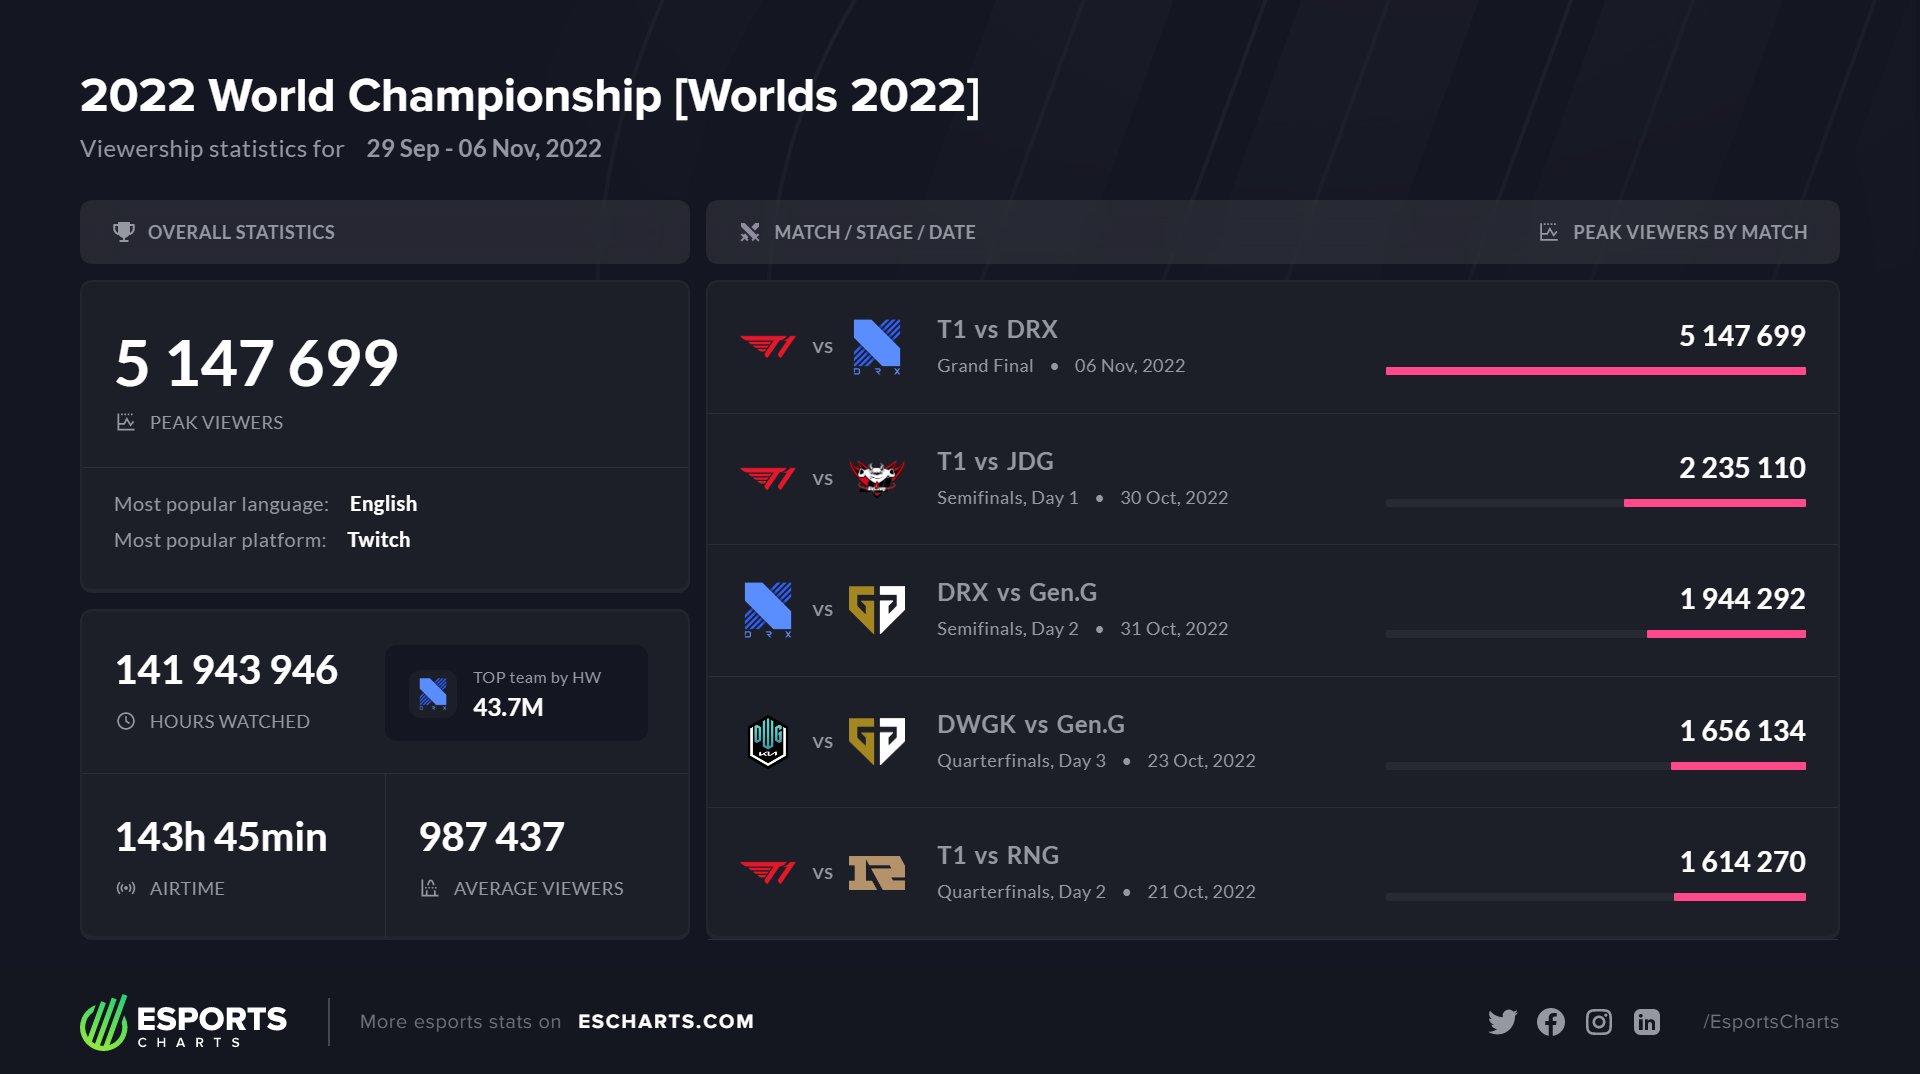 League of Legends Worlds 2022 peaks at 5.15M viewers